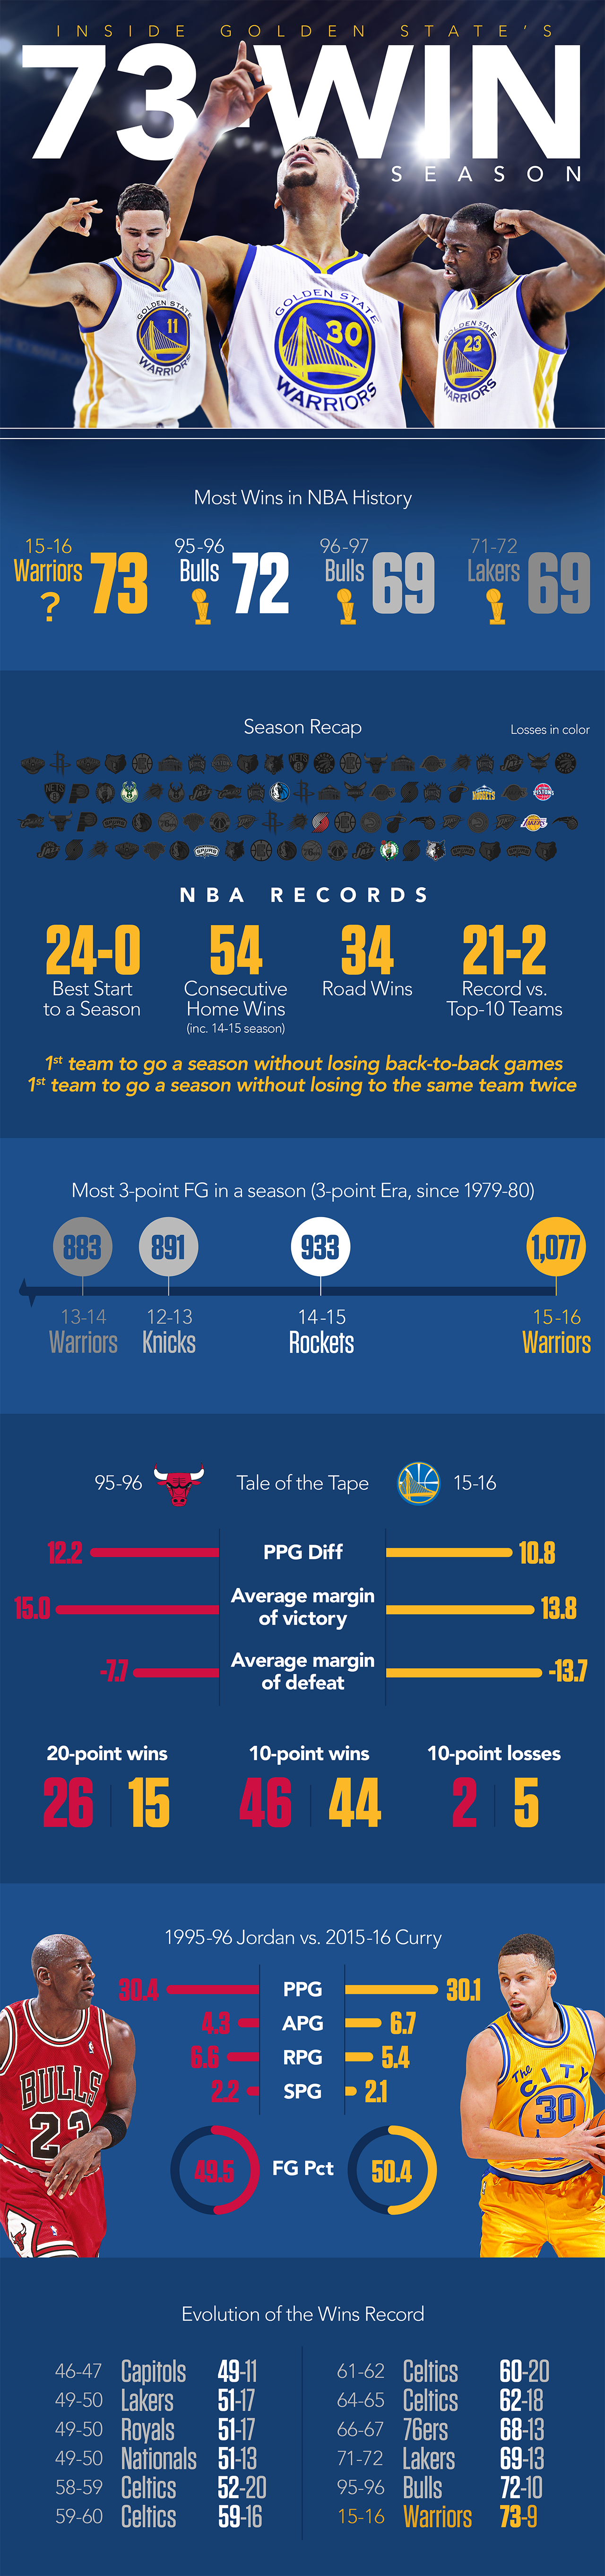 Infographic Inside the Golden State Warriors' 73win season Stats